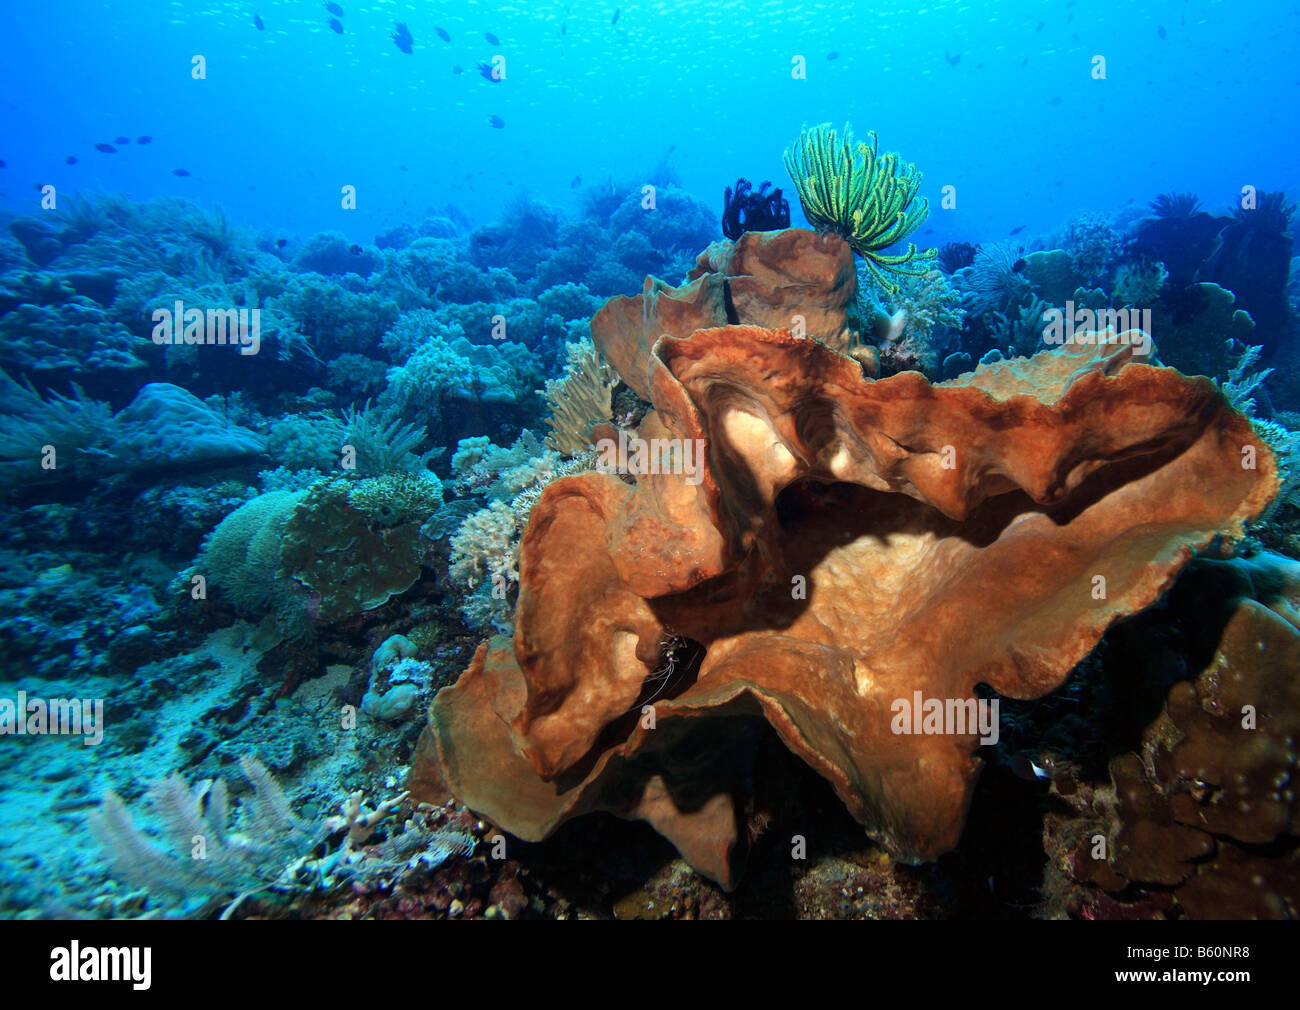 Large indo pacific sponge on coral reef filtering water Stock Photo